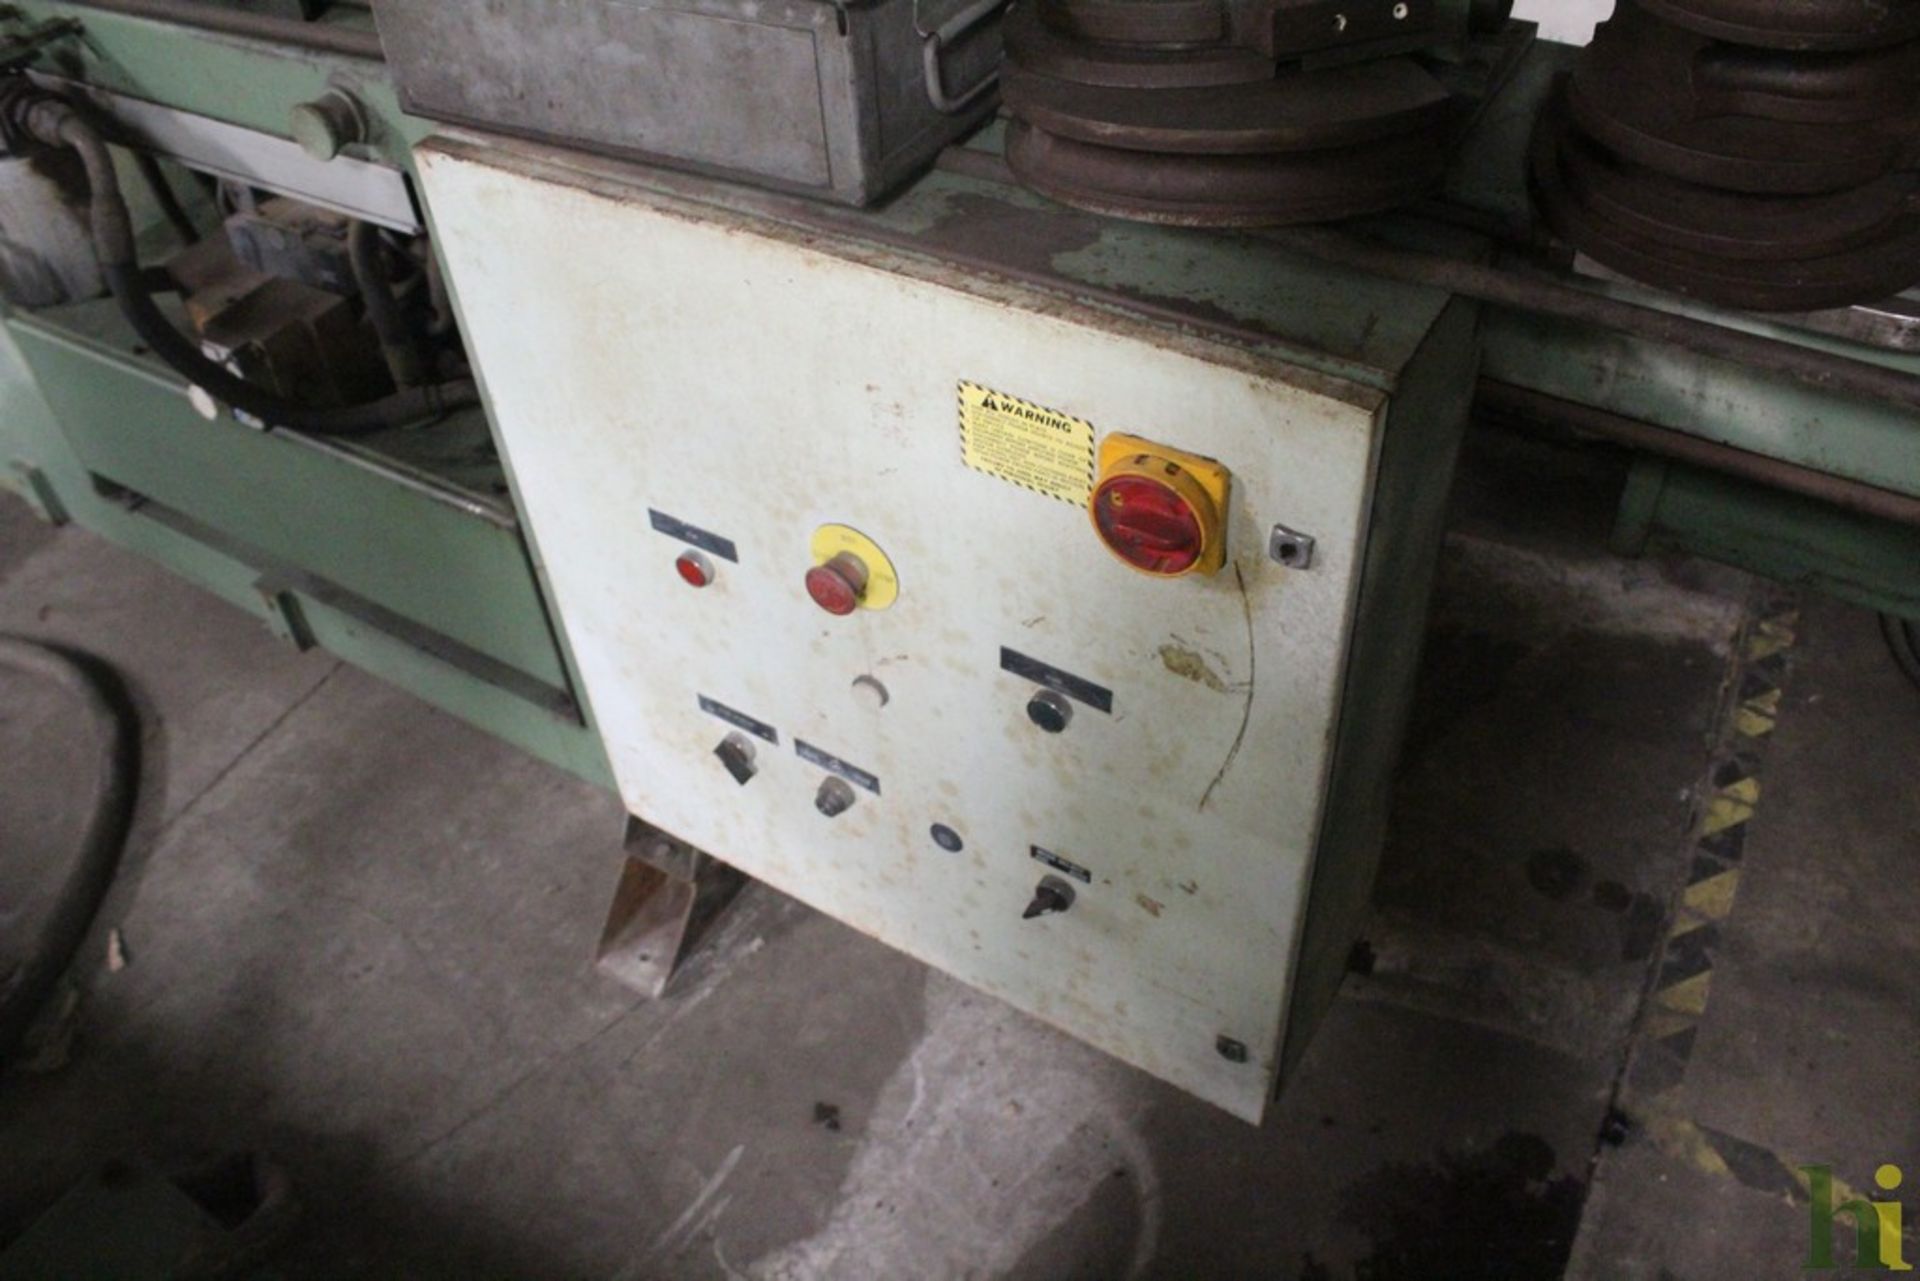 BEMA MODEL 635/AD HYDRAULIC TUBE BENDER, S/N 1505, WITH MANDREL EXTRACTOR - Image 7 of 7